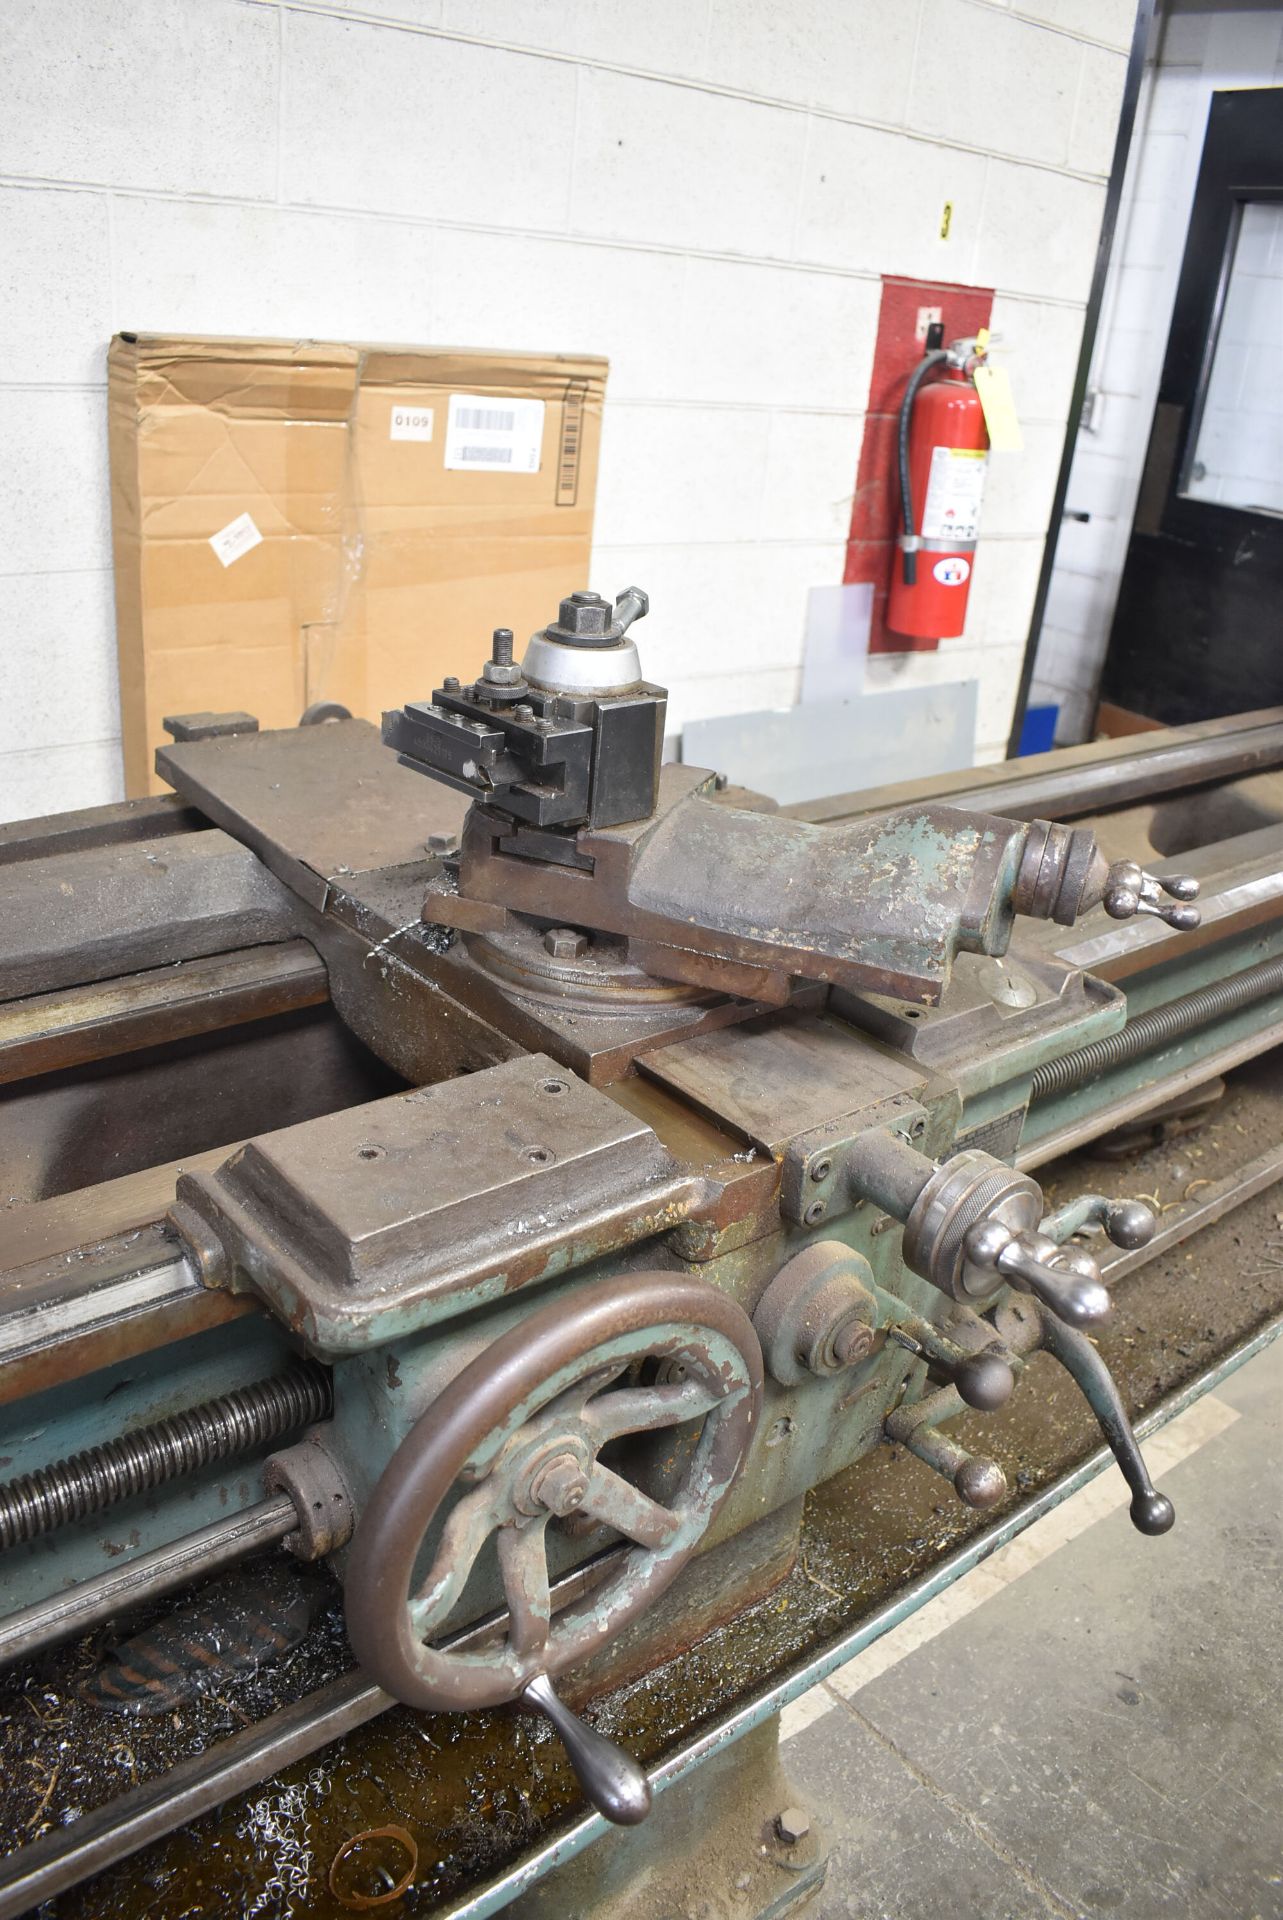 BRADFORD 18X100 ENGINE LATHE 18" SWING OVER BED, 100" DISTANCE BETWEEN CENTERS, 1.5" SPINDLE BORE, - Image 4 of 9